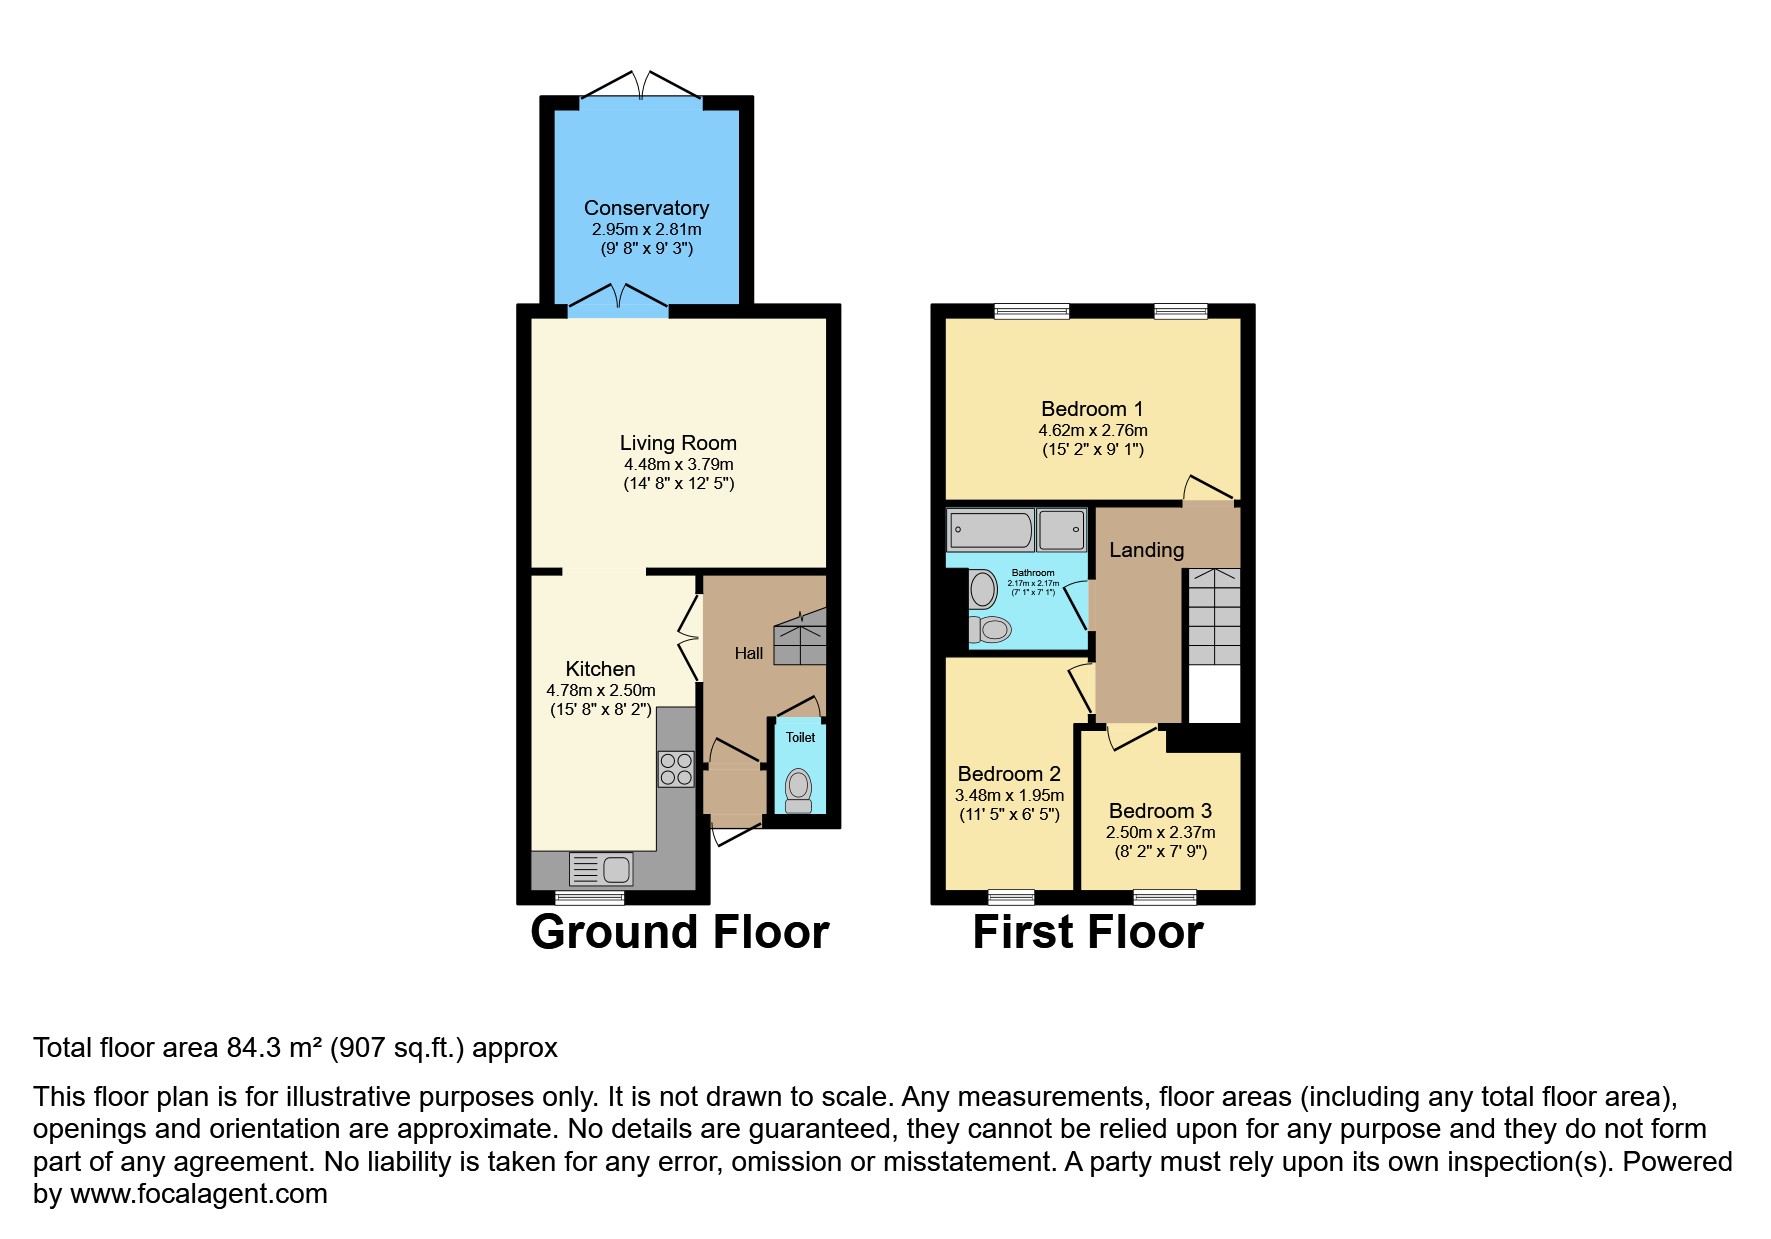 Floor plan of this Property